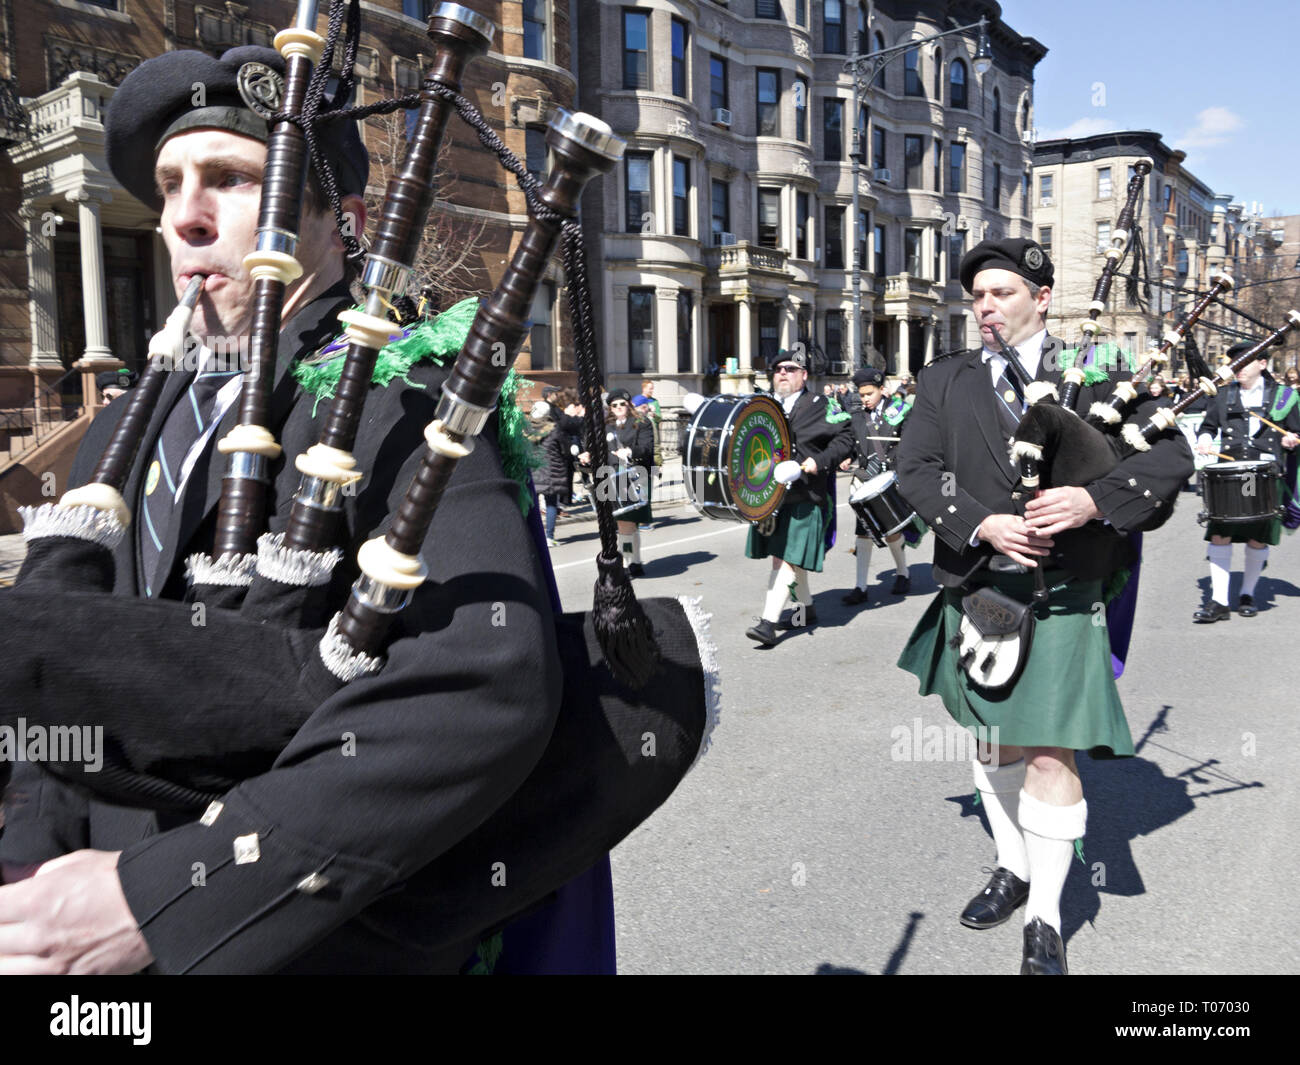 St.Patrick's Day Parade in the the Park Slope neighborhood of Brooklyn, NY, 2019. Stock Photo